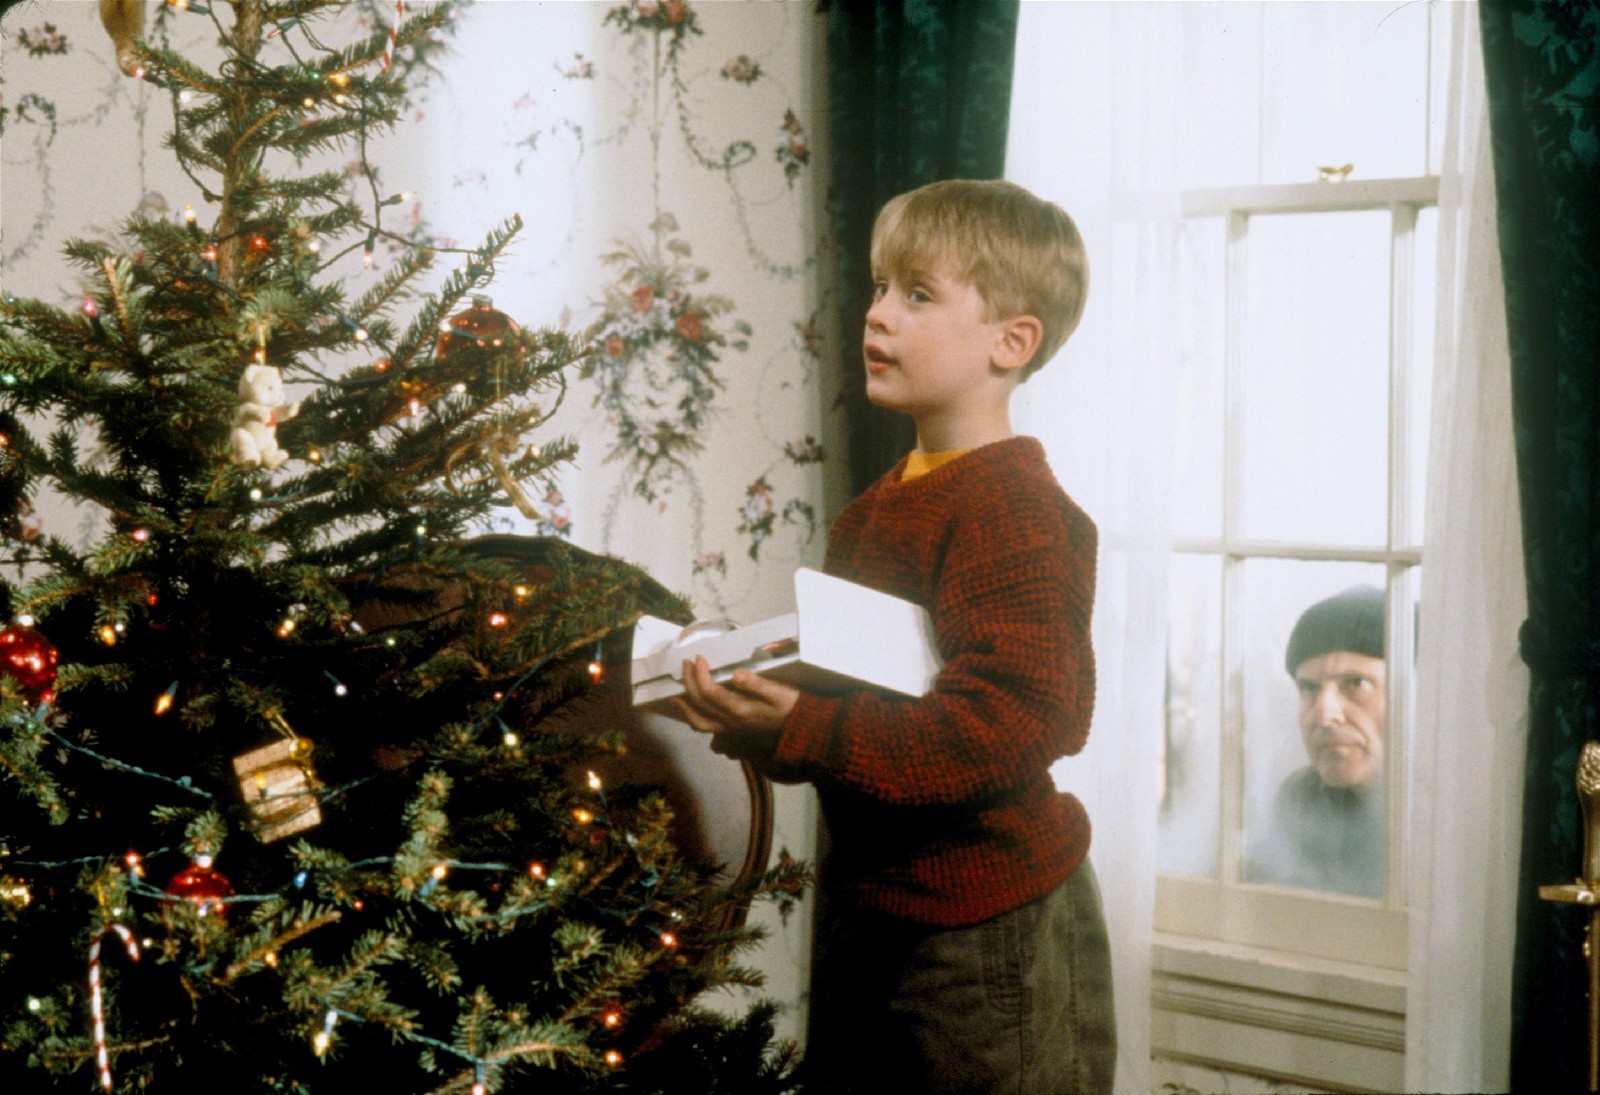 A still from one of the best Christmas movies of all time, Home Alone